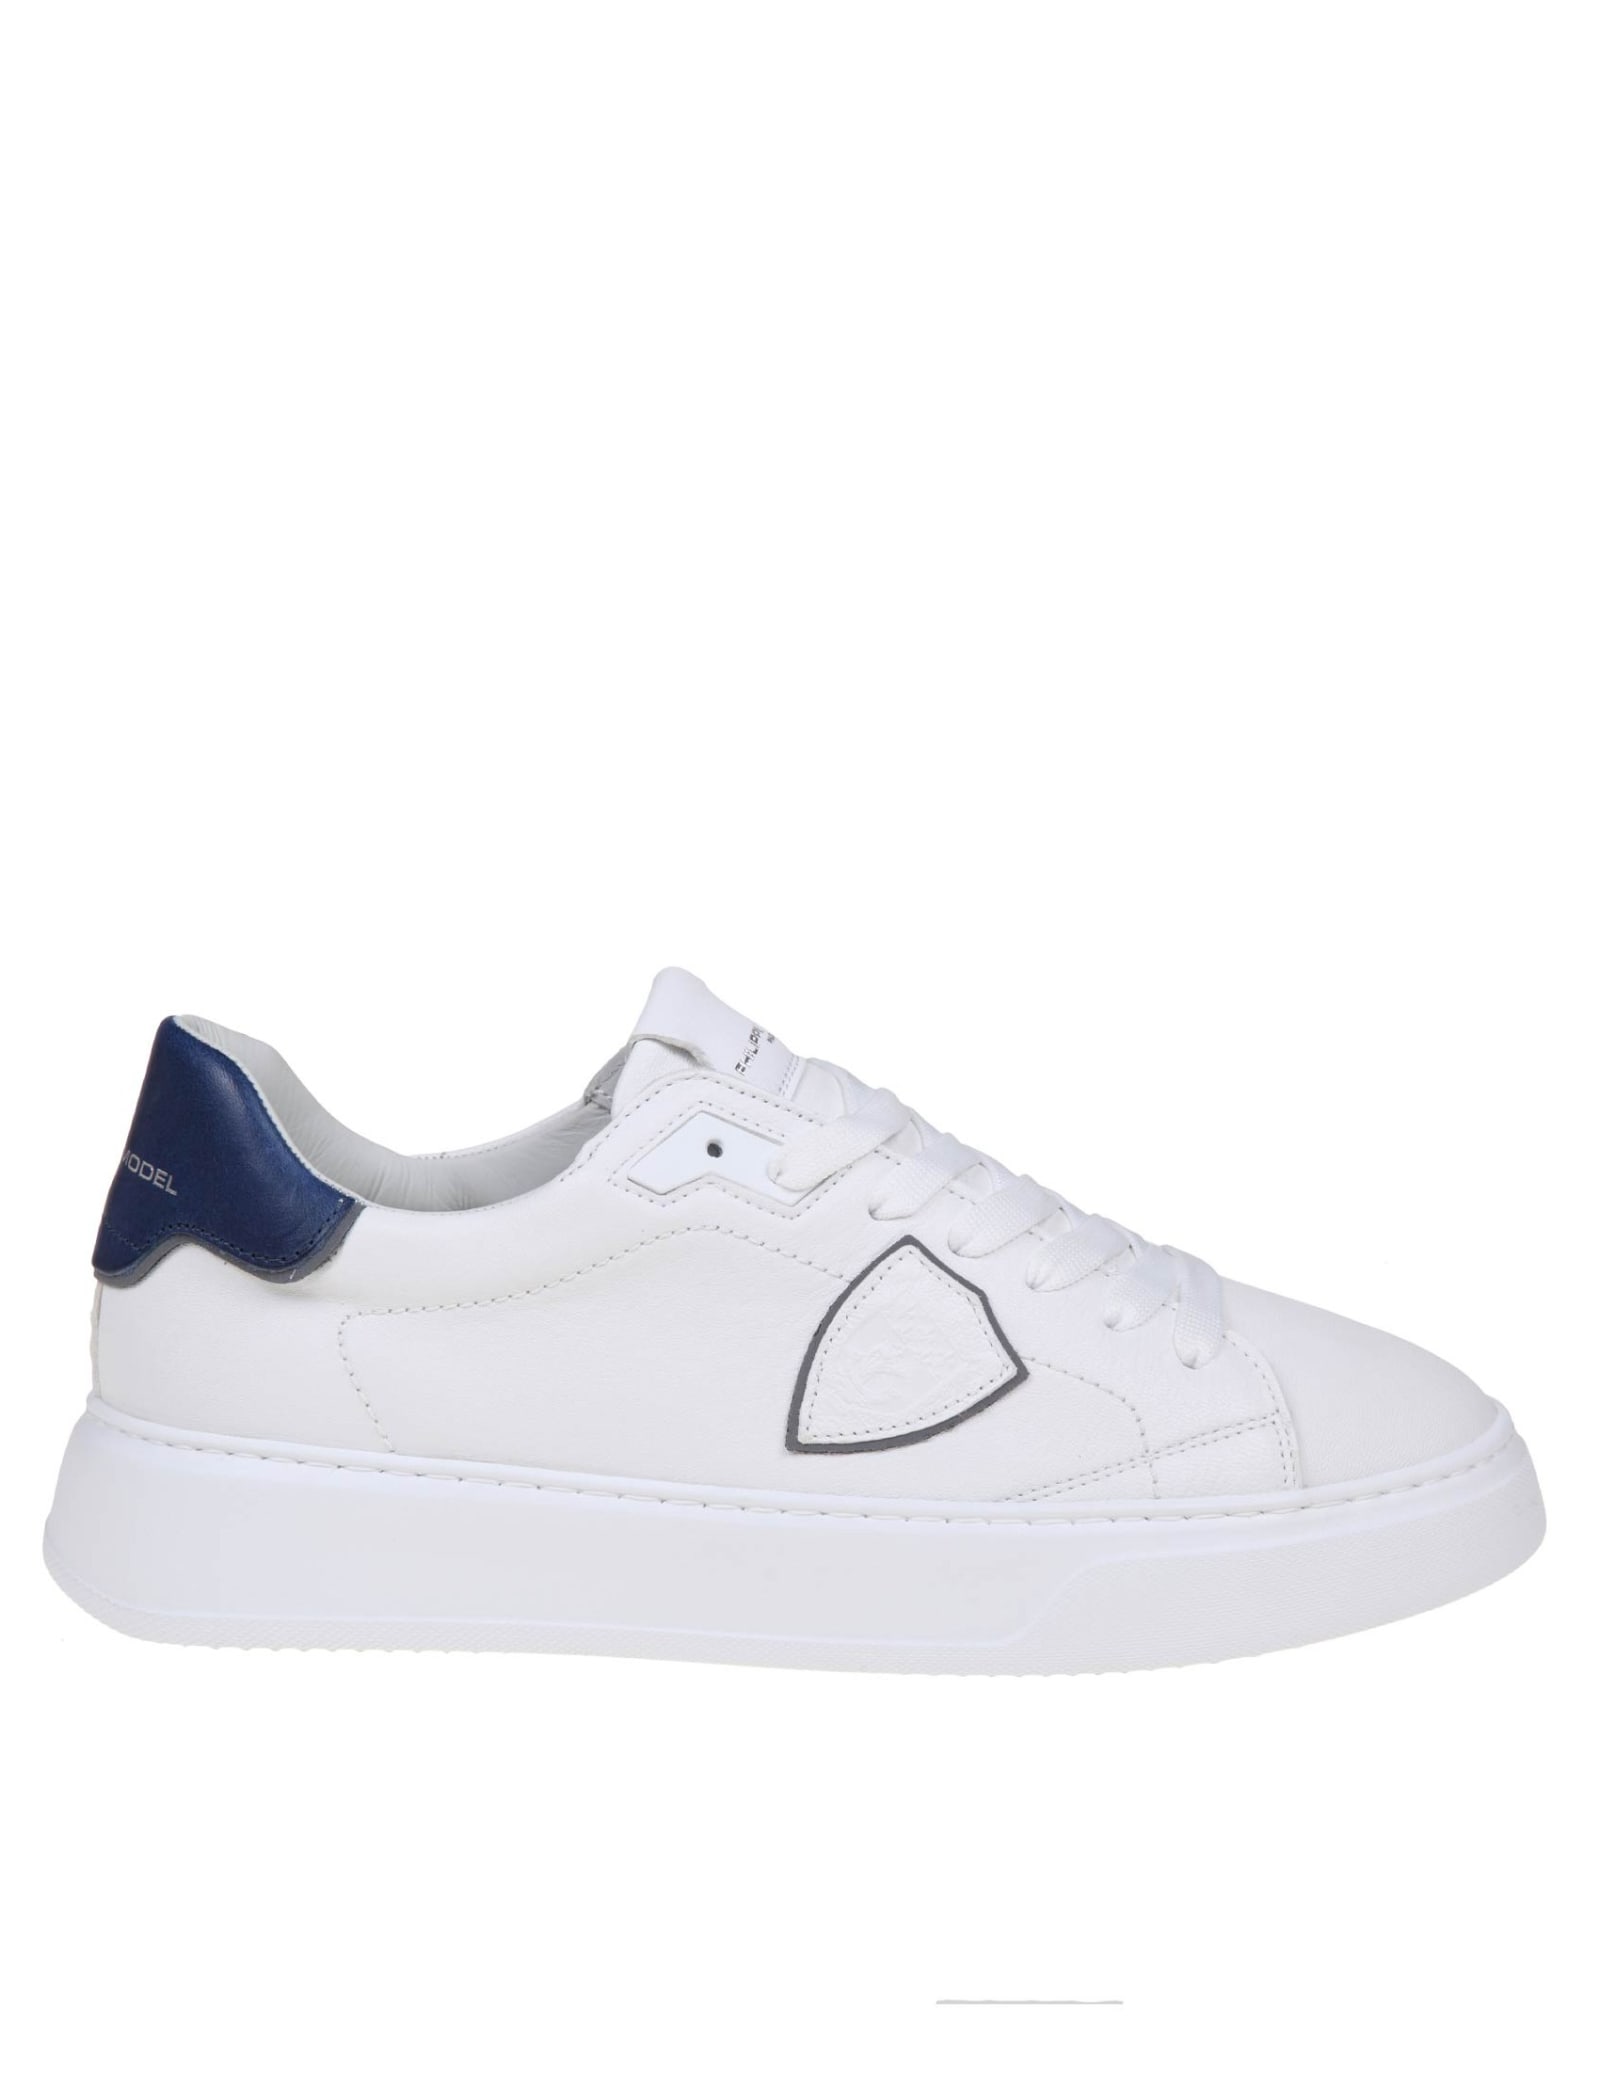 Temple Sneakers In White/blue Leather Philippe Model